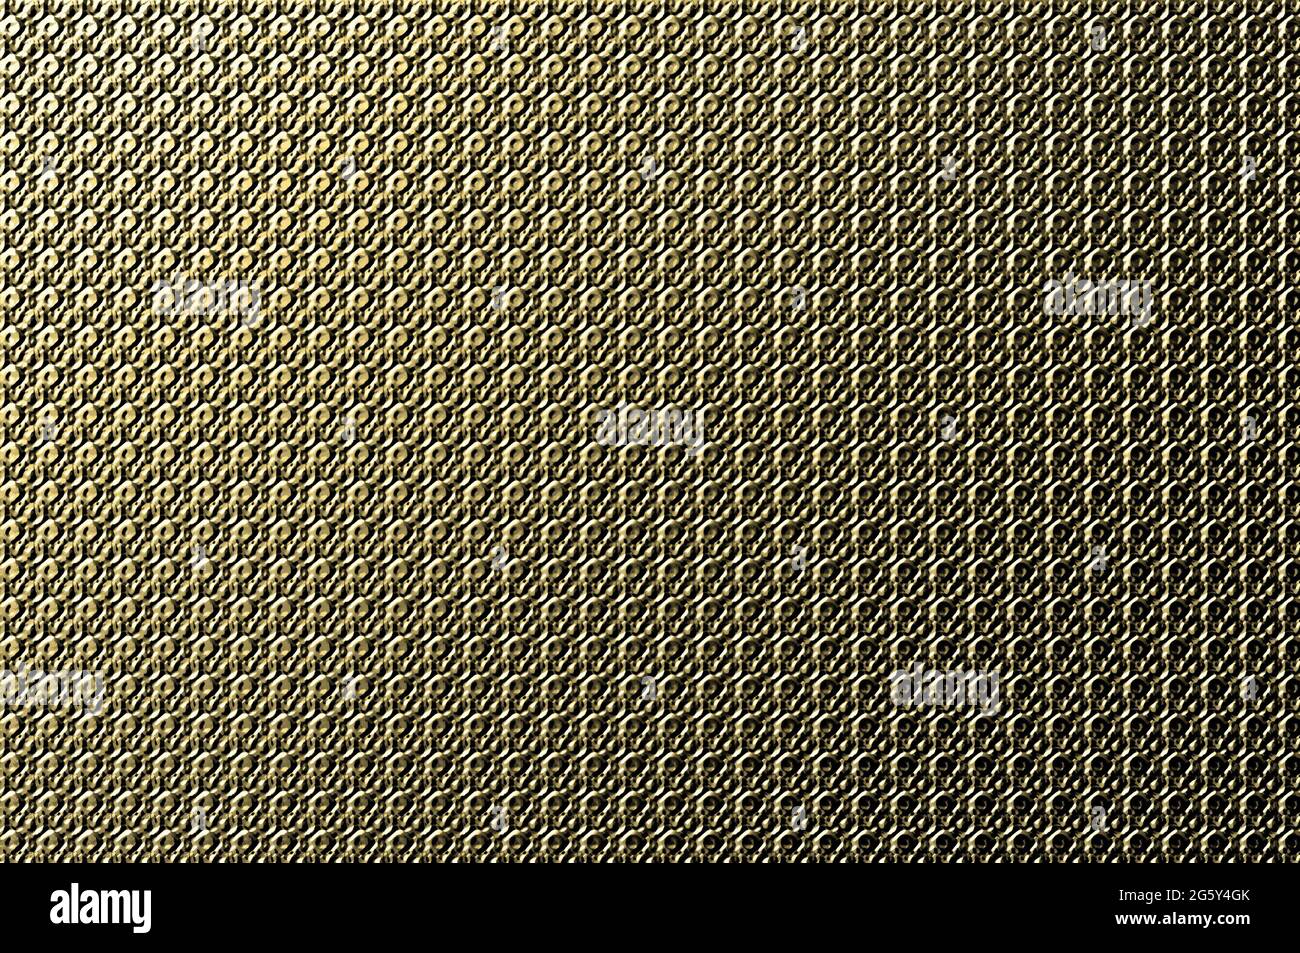 Abstract image of metal plate indented with rows of circles.  Light shines one one end and the other is darker.  Tones of yellow gold. Stock Photo